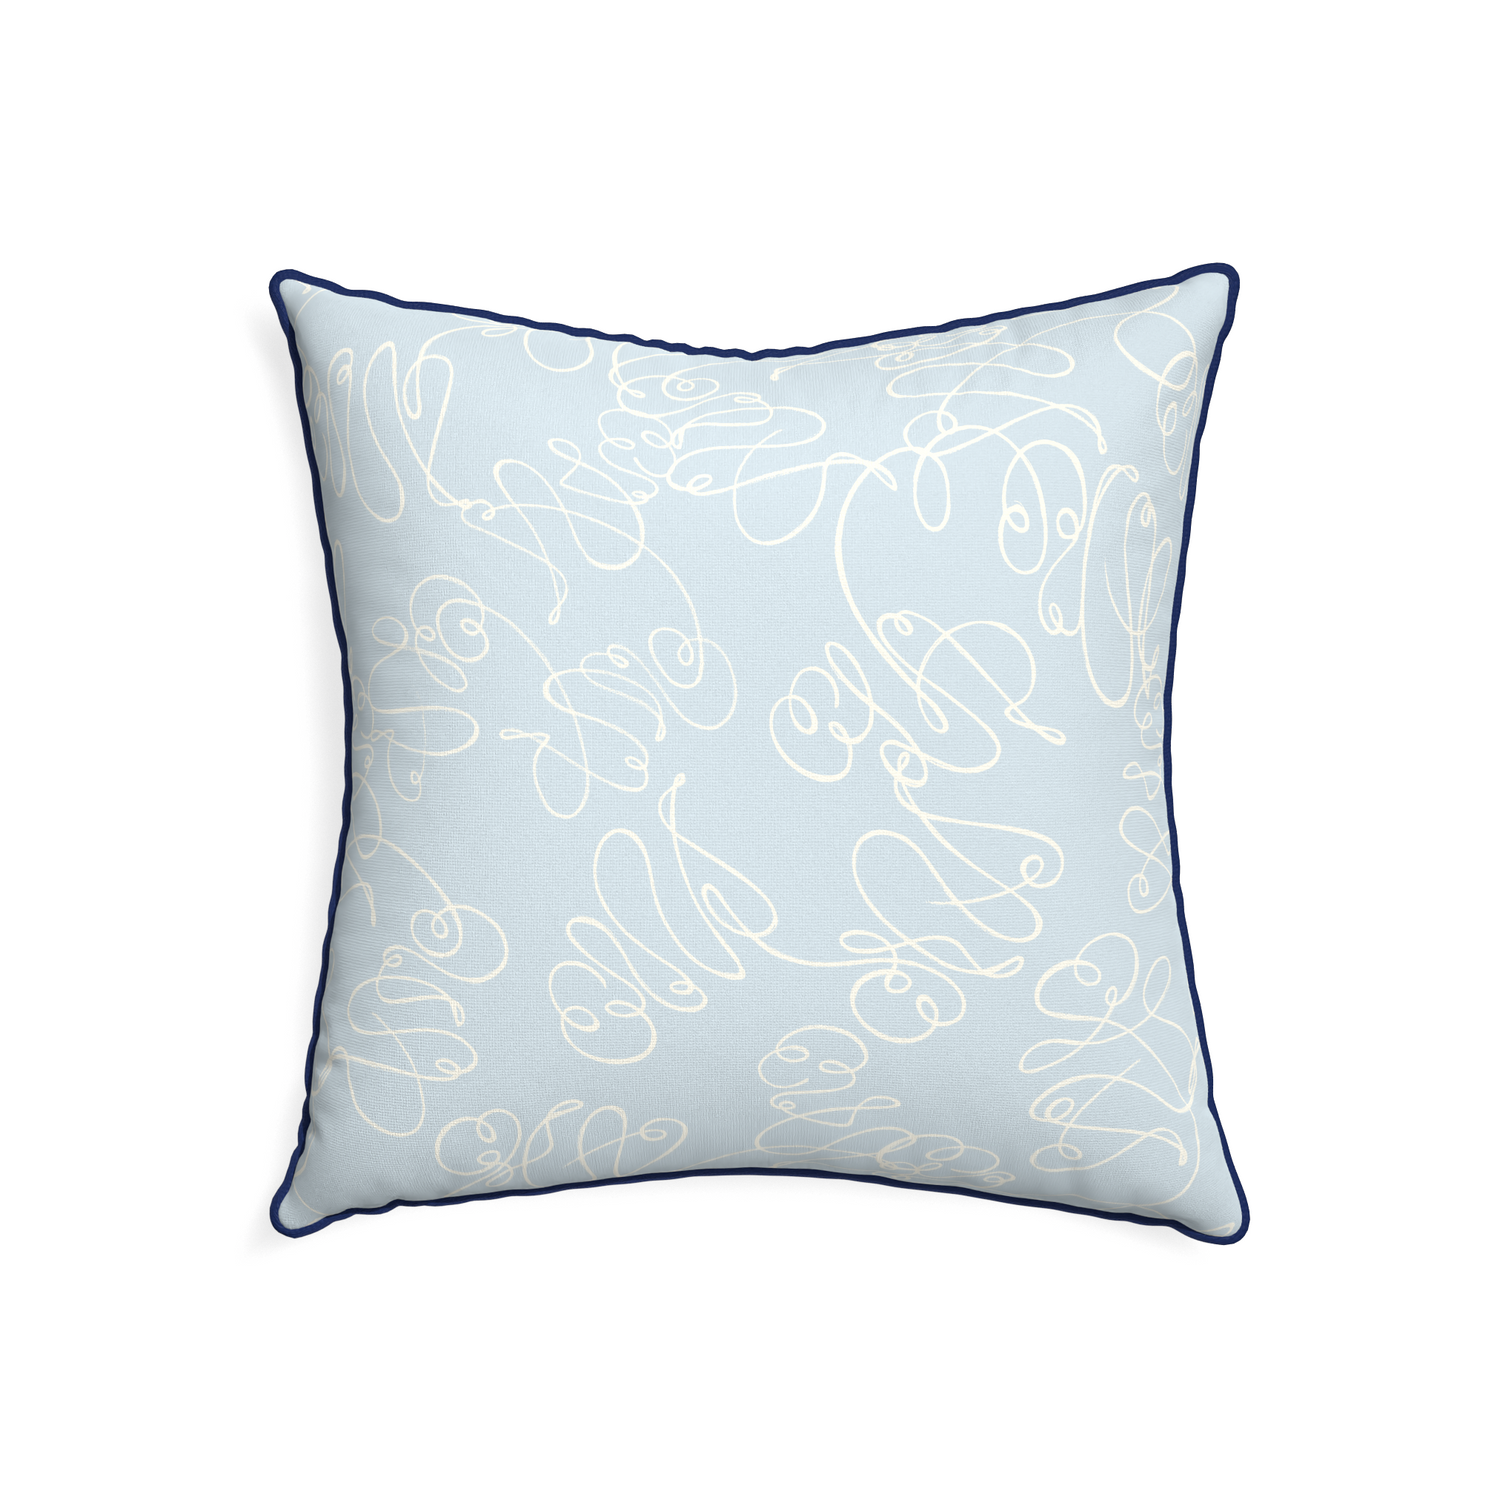 22-square mirabella custom powder blue abstractpillow with midnight piping on white background